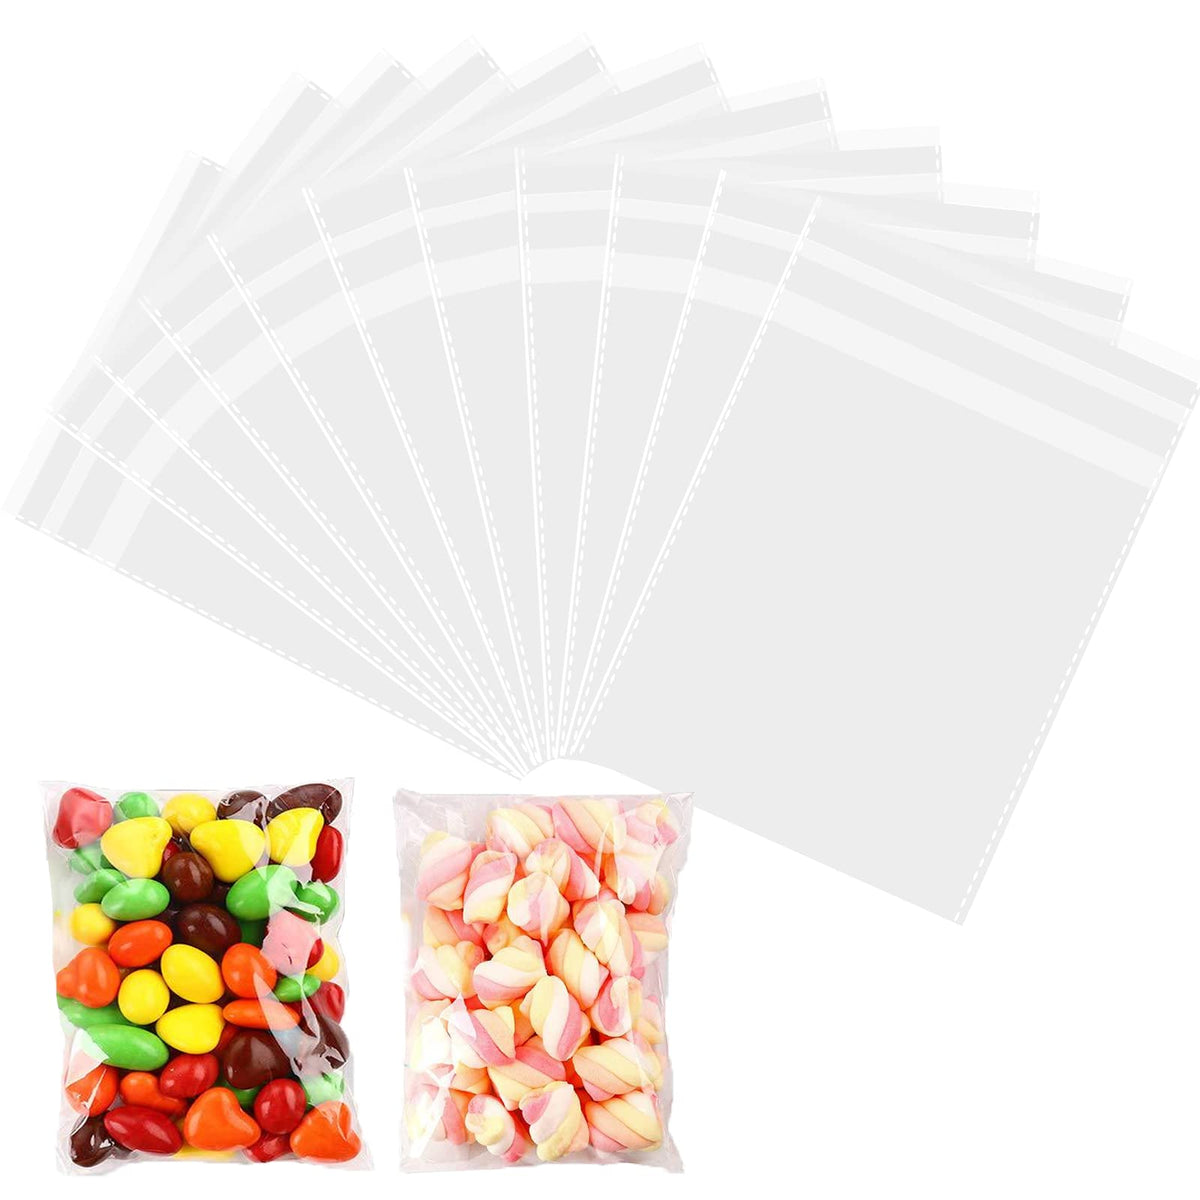 Cellophane Bags Pack of 100 (6 x 9 Inches) - Small Cellophane Sweets Cookies Bags, Self Seal Clear Adhesive Plastic Bags for Cookies, Sweets, Gifts, Jewellery, Soap, Chocolates